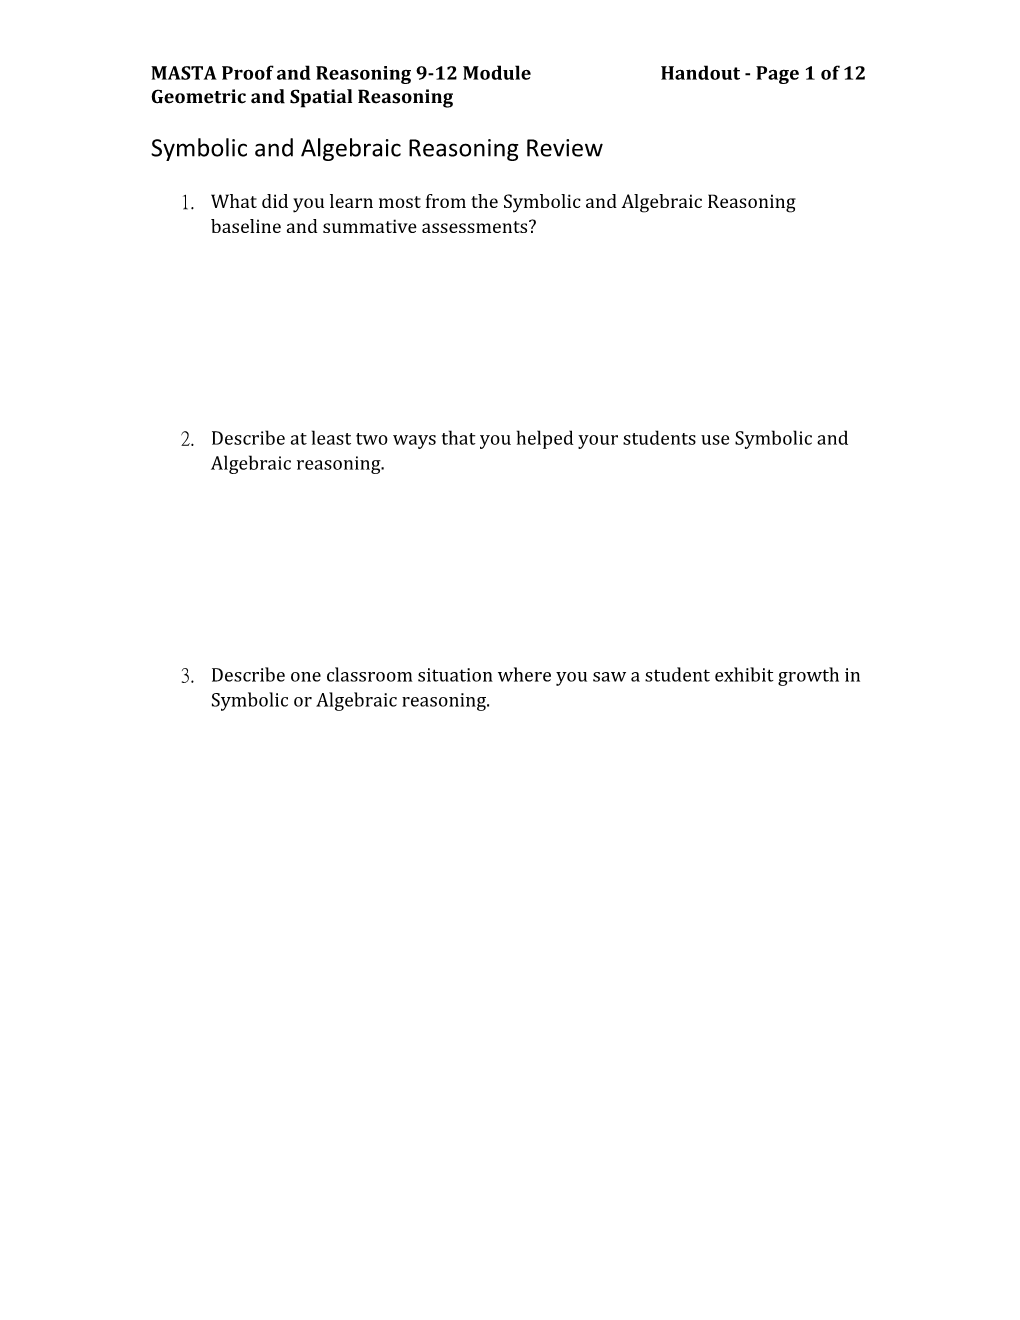 MASTA Proof and Reasoning 9-12 Module Handout - Page 1 of 12